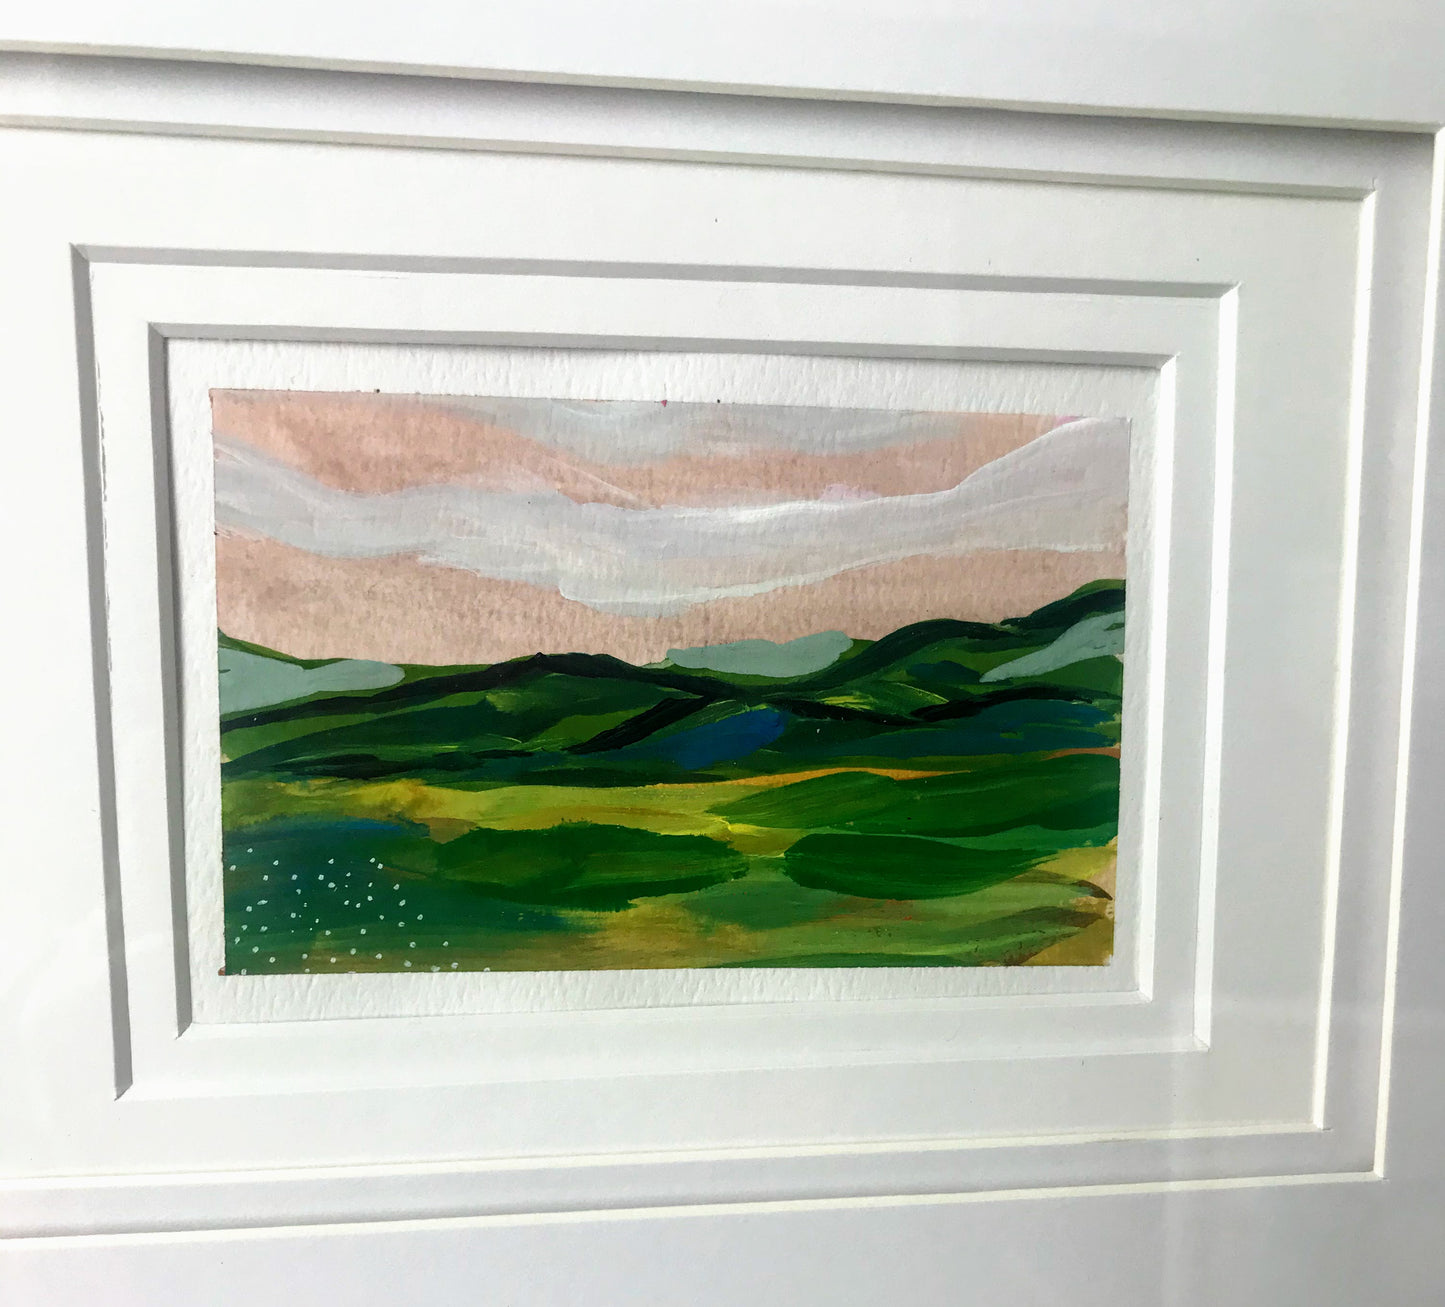 January 18, 2021 daily painting practice  5" x 4"  Mountain Landscape Painting in Salem, Virginia  gouache on paper  comes with the matting   frame is not included  free shipping  follow me on instagram or sign up for the emails to get the first look at the daily painting challenge.